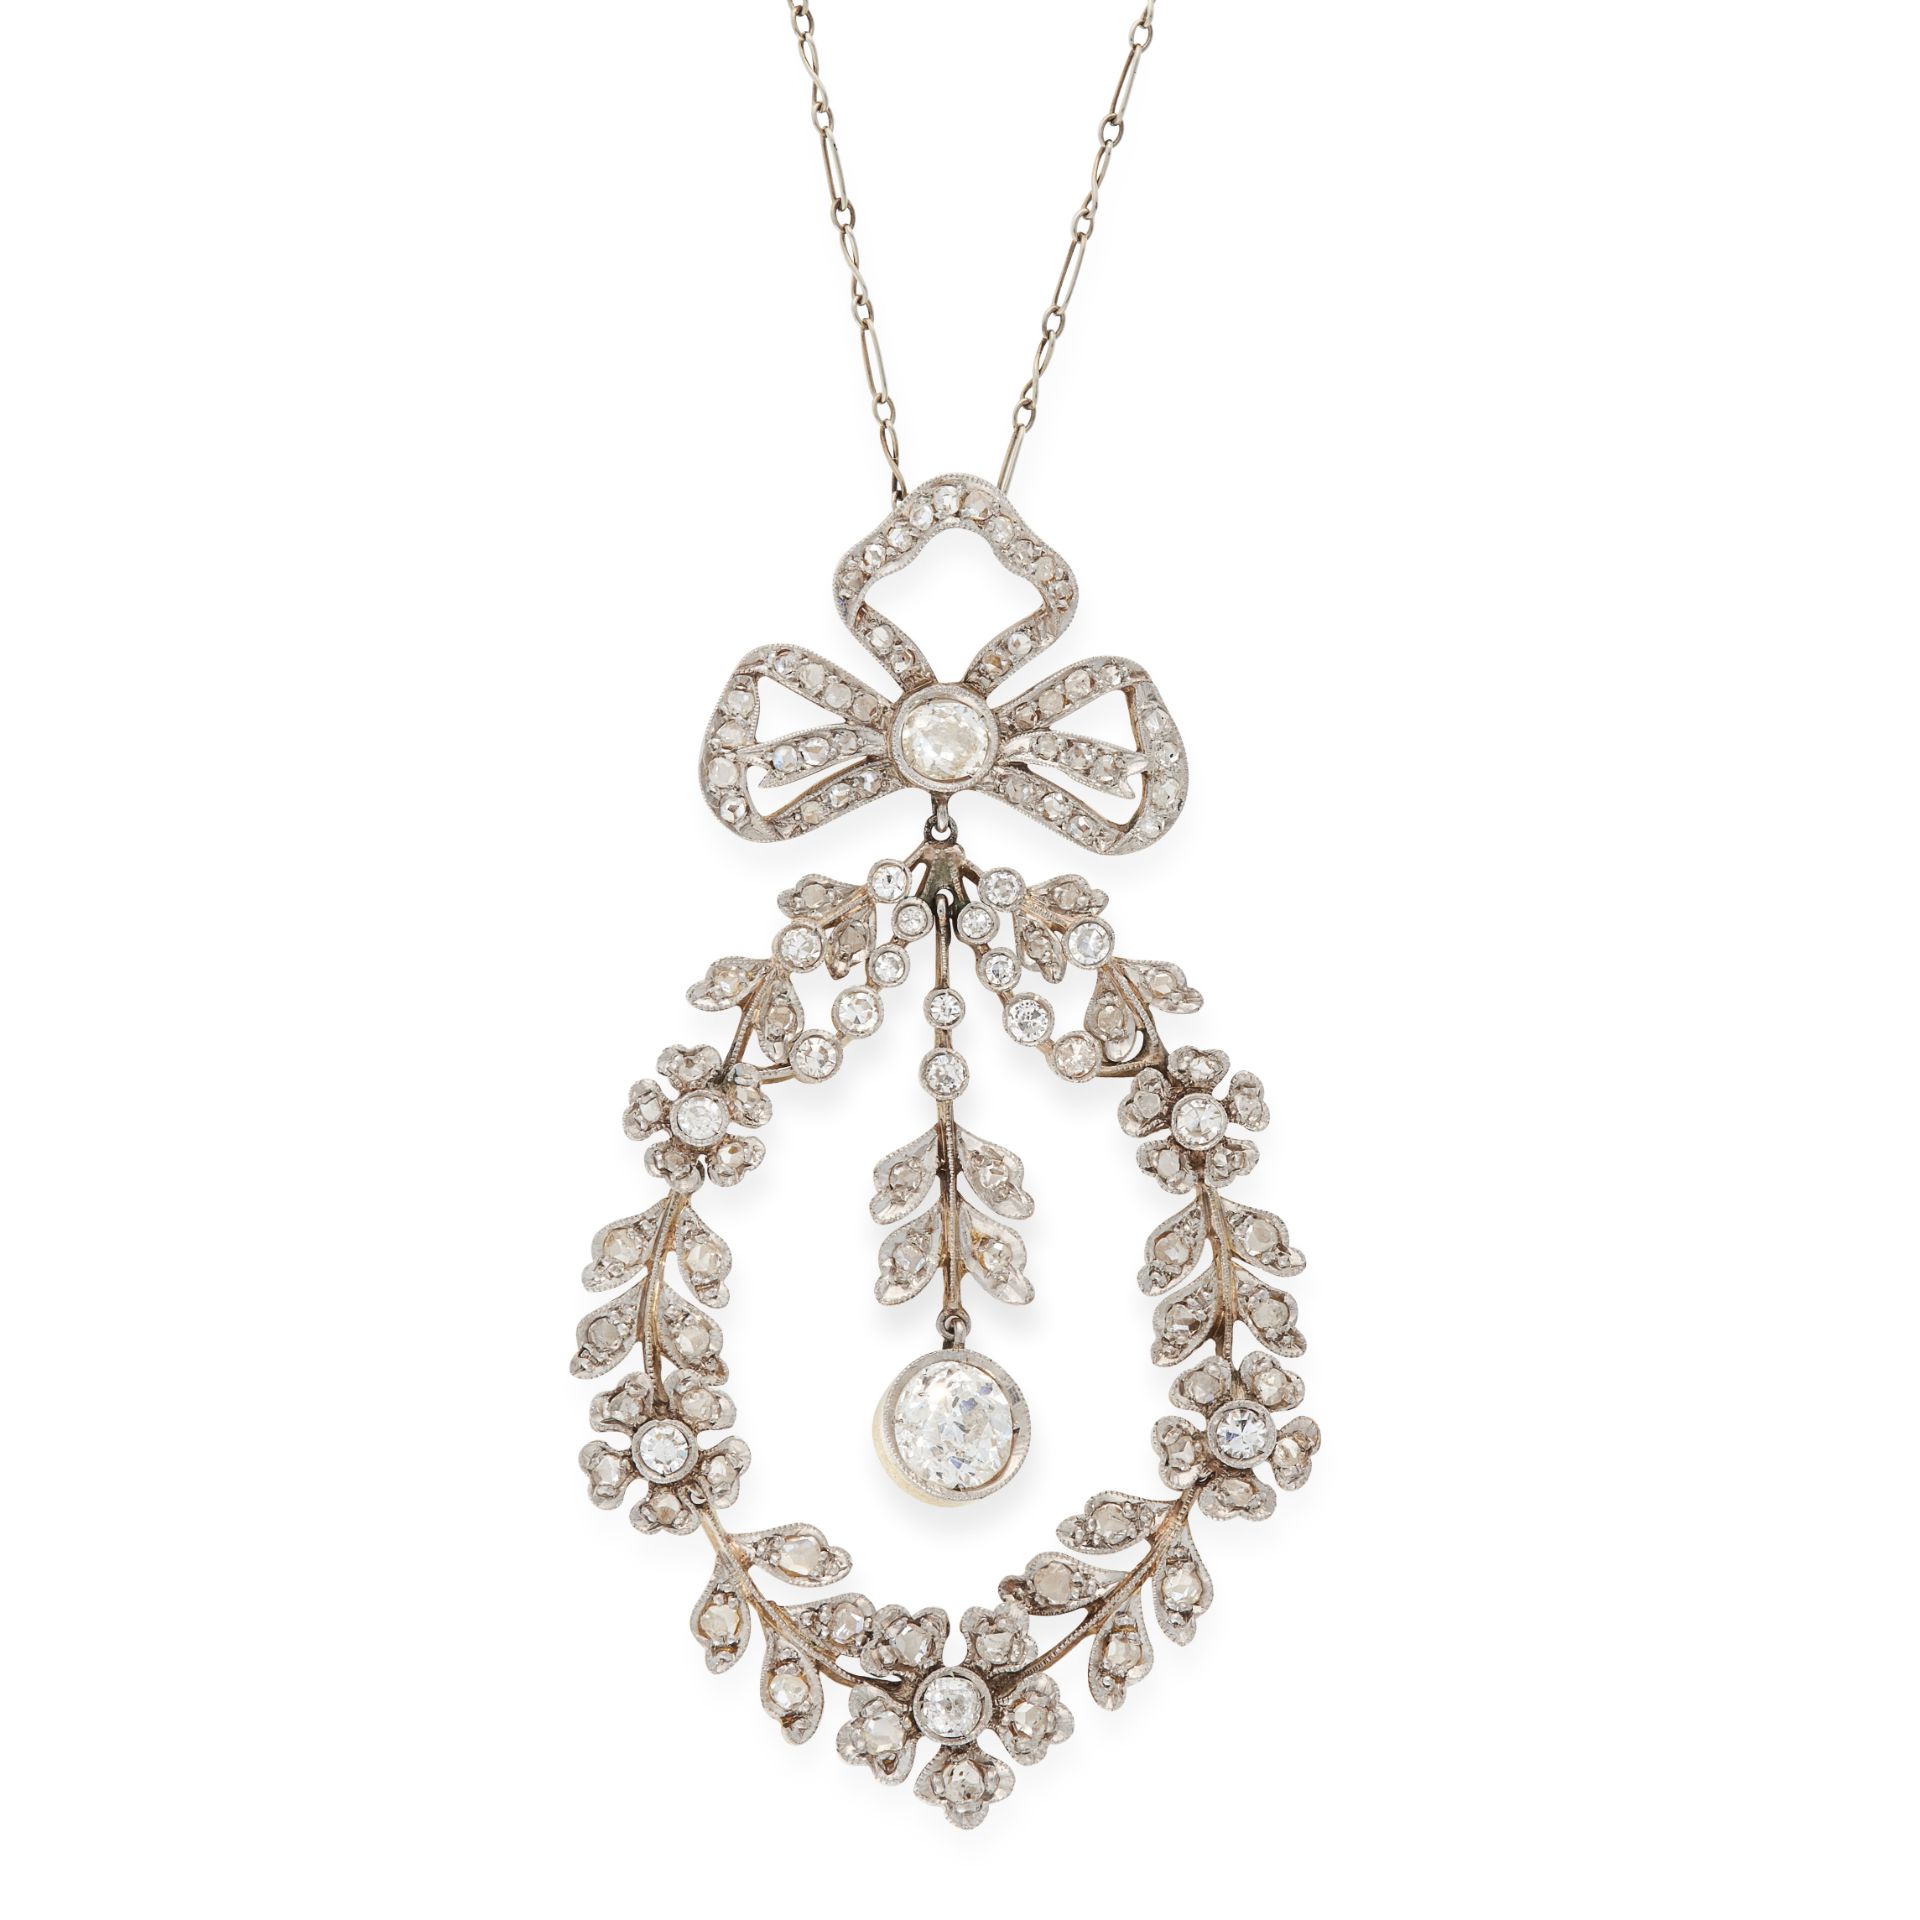 AN ANTIQUE BELLE EPOQUE DIAMOND PENDANT NECKLACE, EARLY 20TH CENTURY set with a central old cut